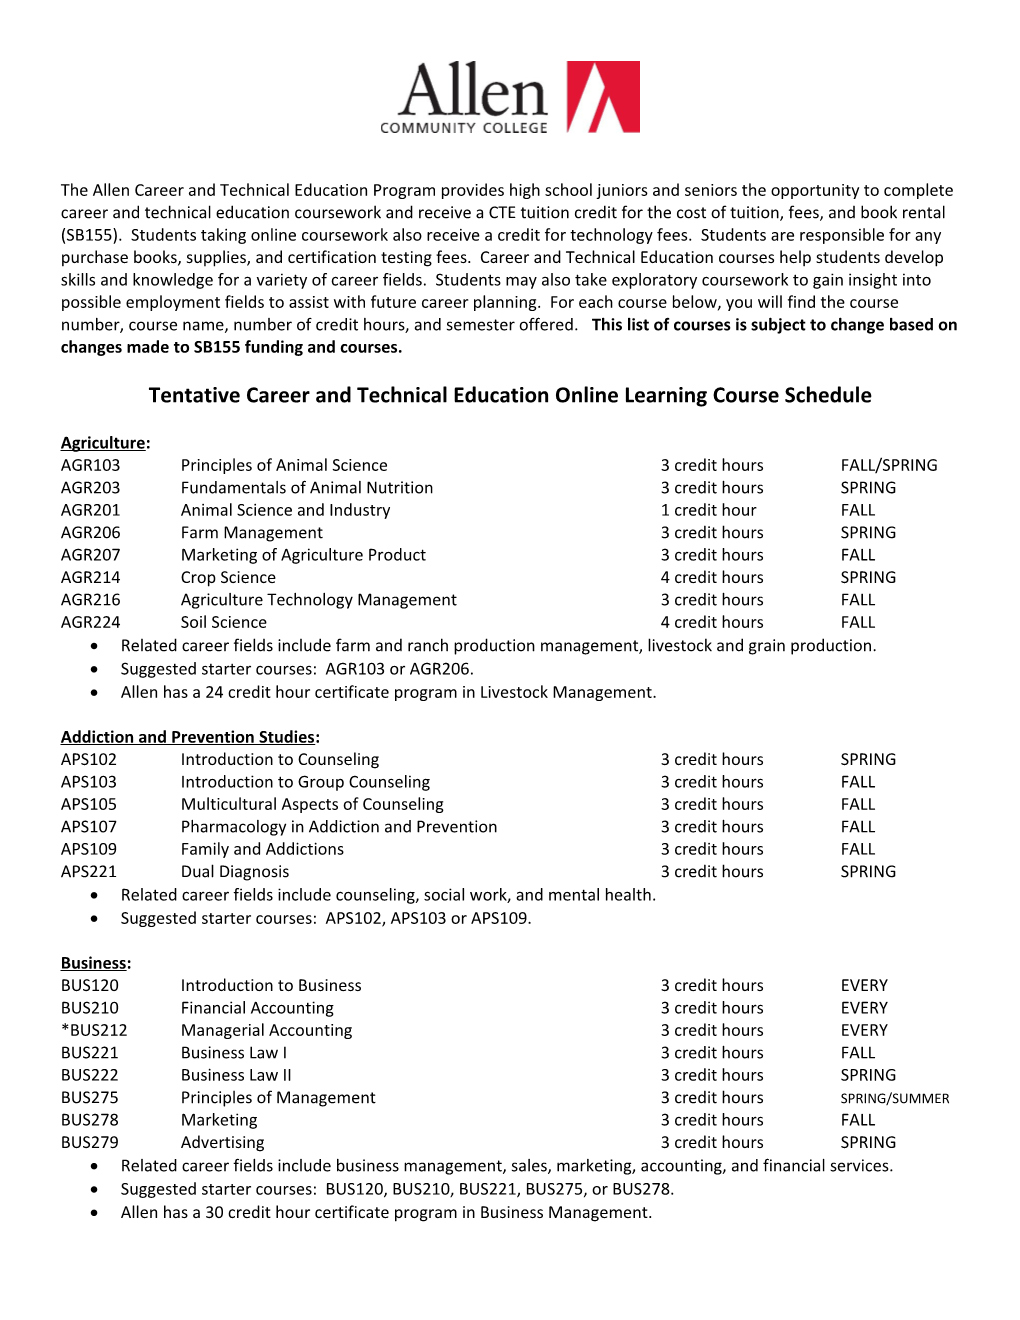 Tentative Career and Technical Education Online Learning Course Schedule